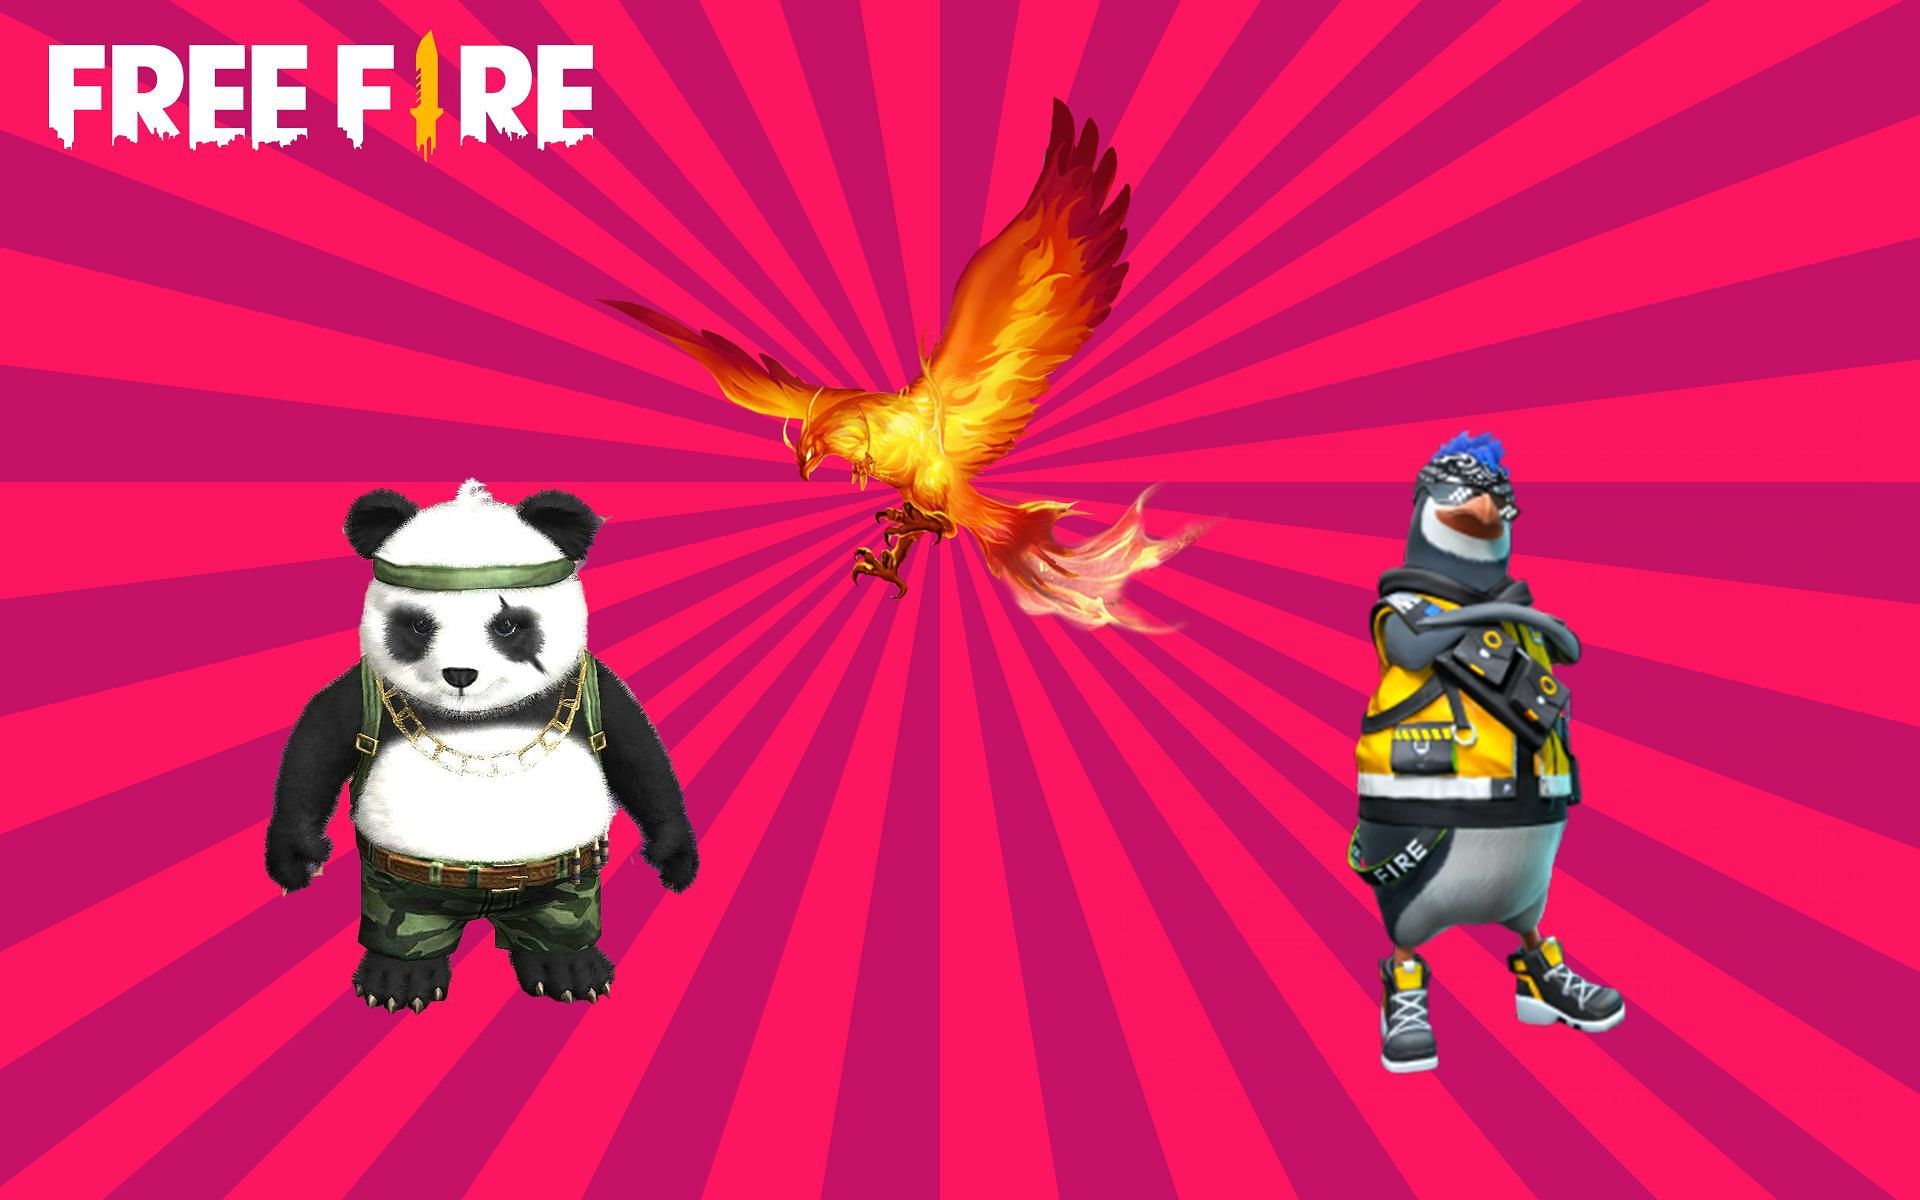 Pets and characters are two unique elements of the game (Image via Free Fire)